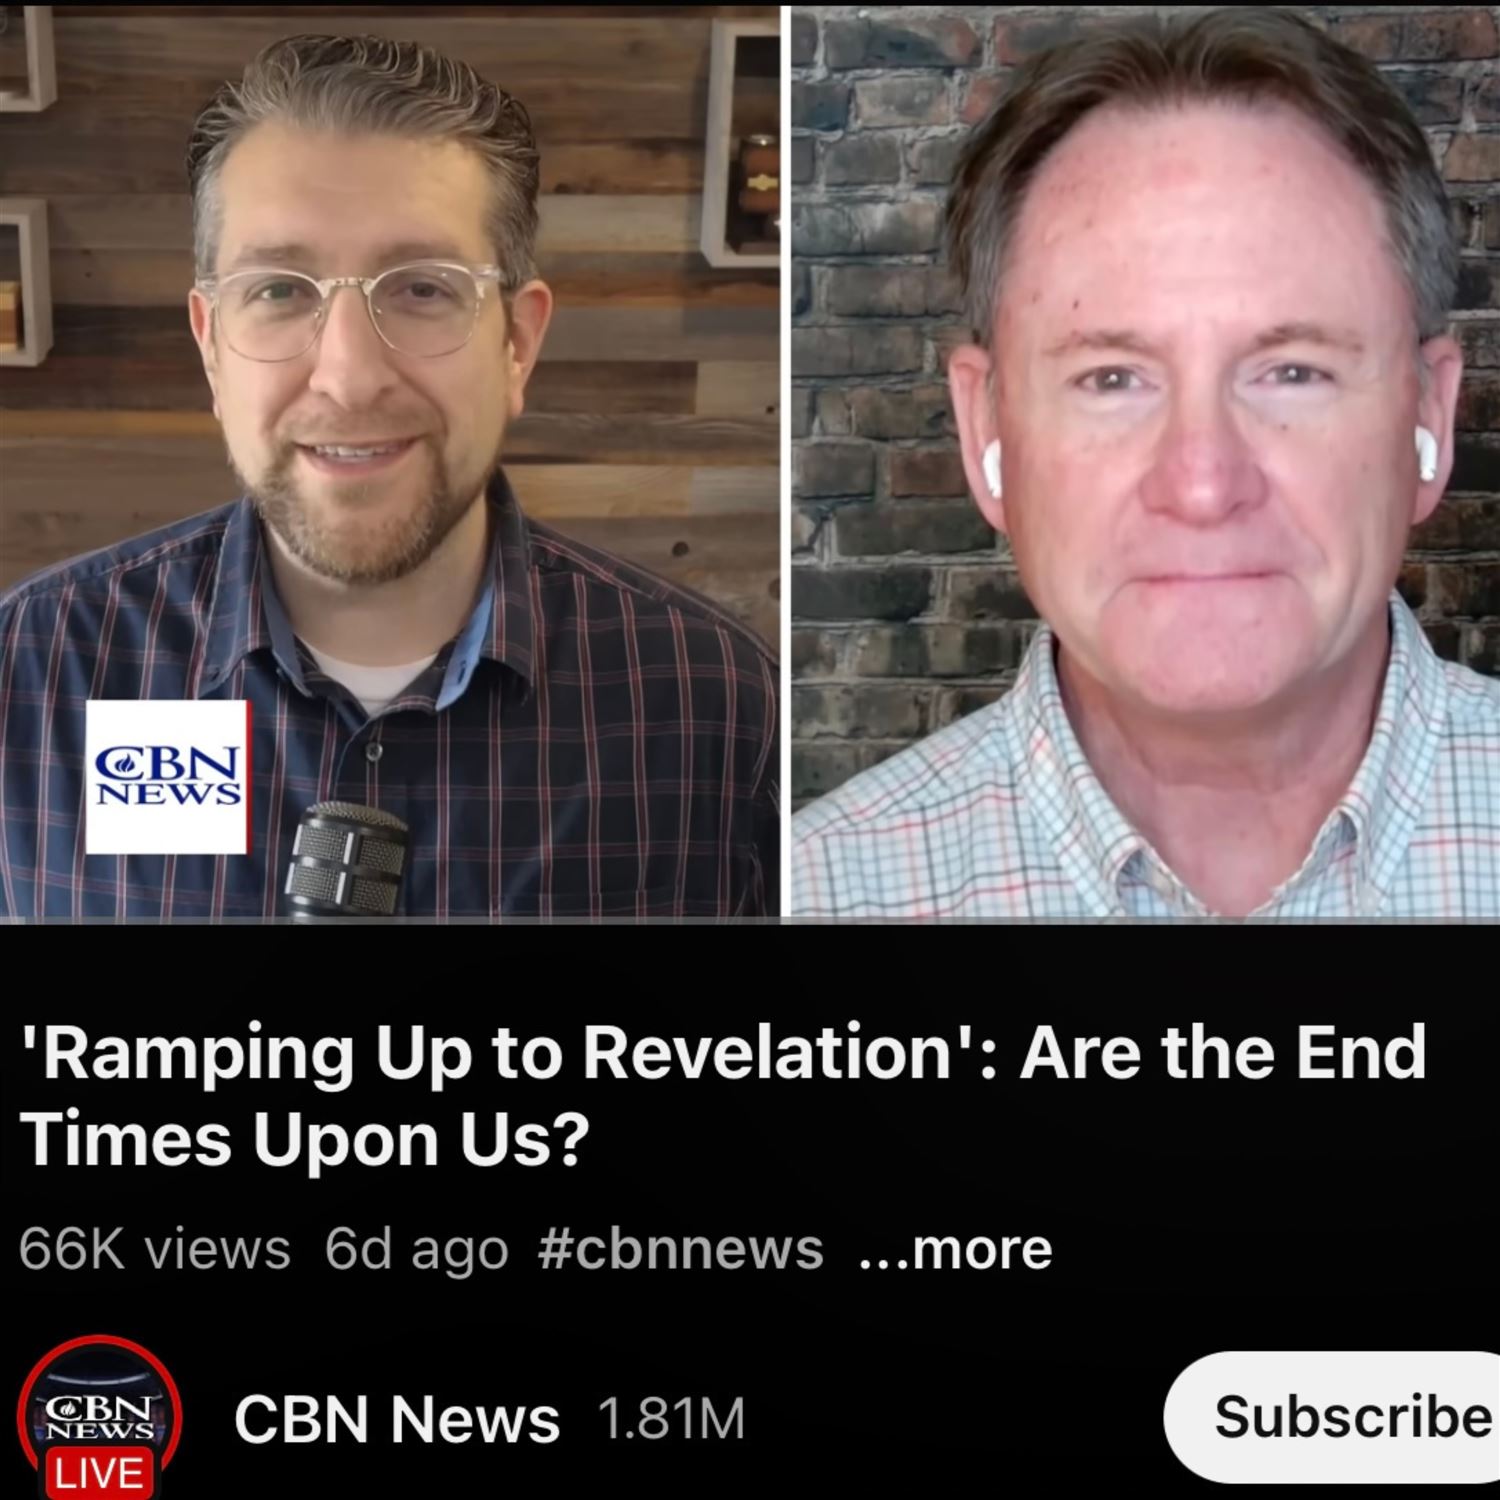 Christian perspectives on end times